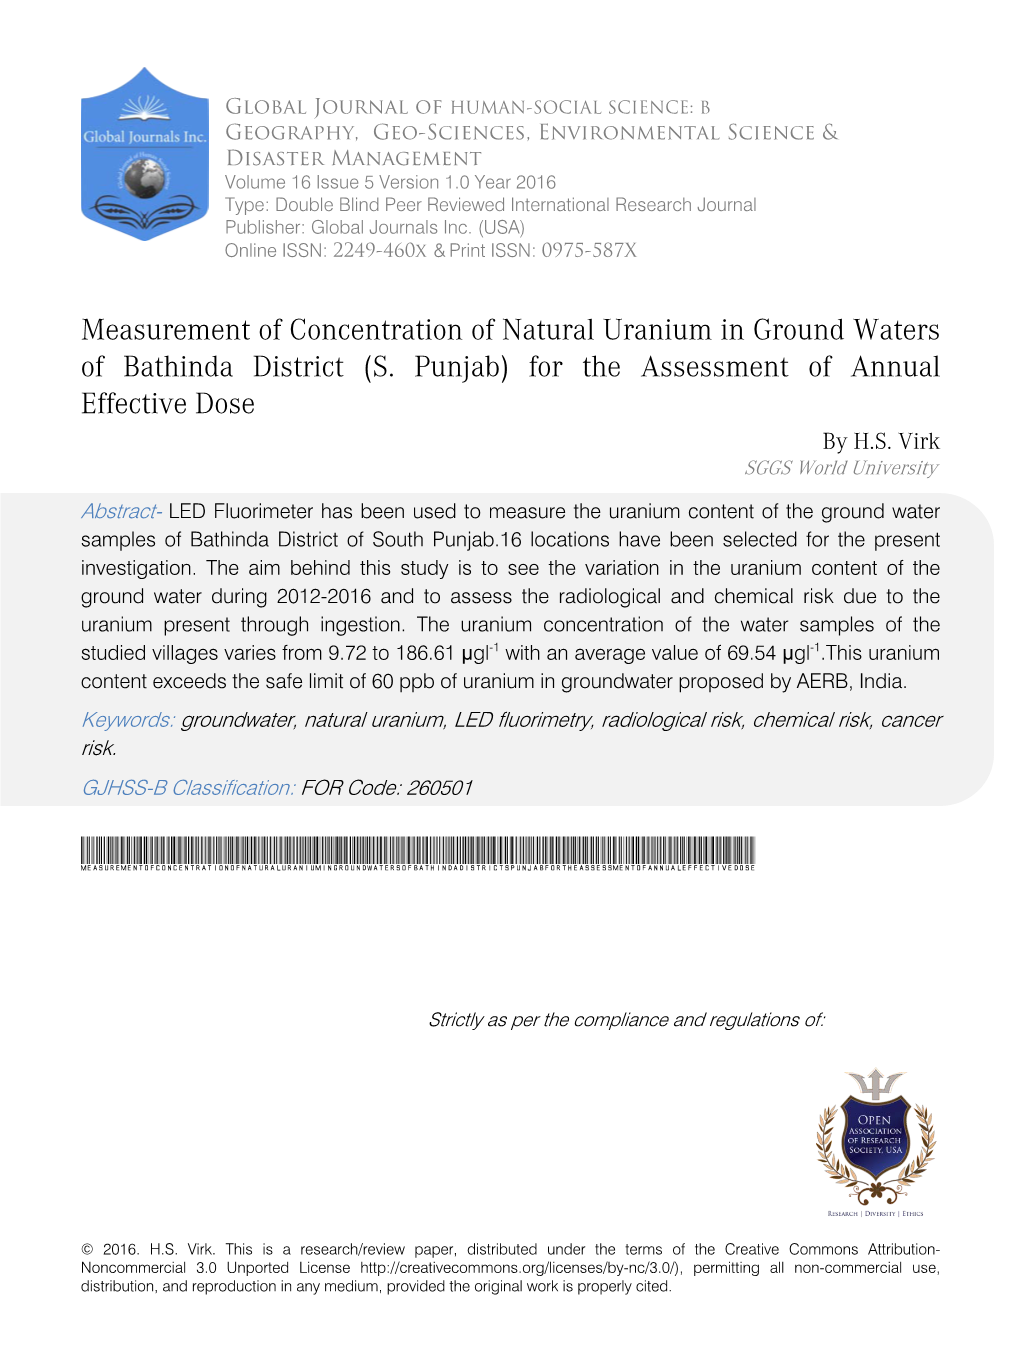 Measurement of Concentration of Natural Uranium in Ground Waters of Bathinda District (S